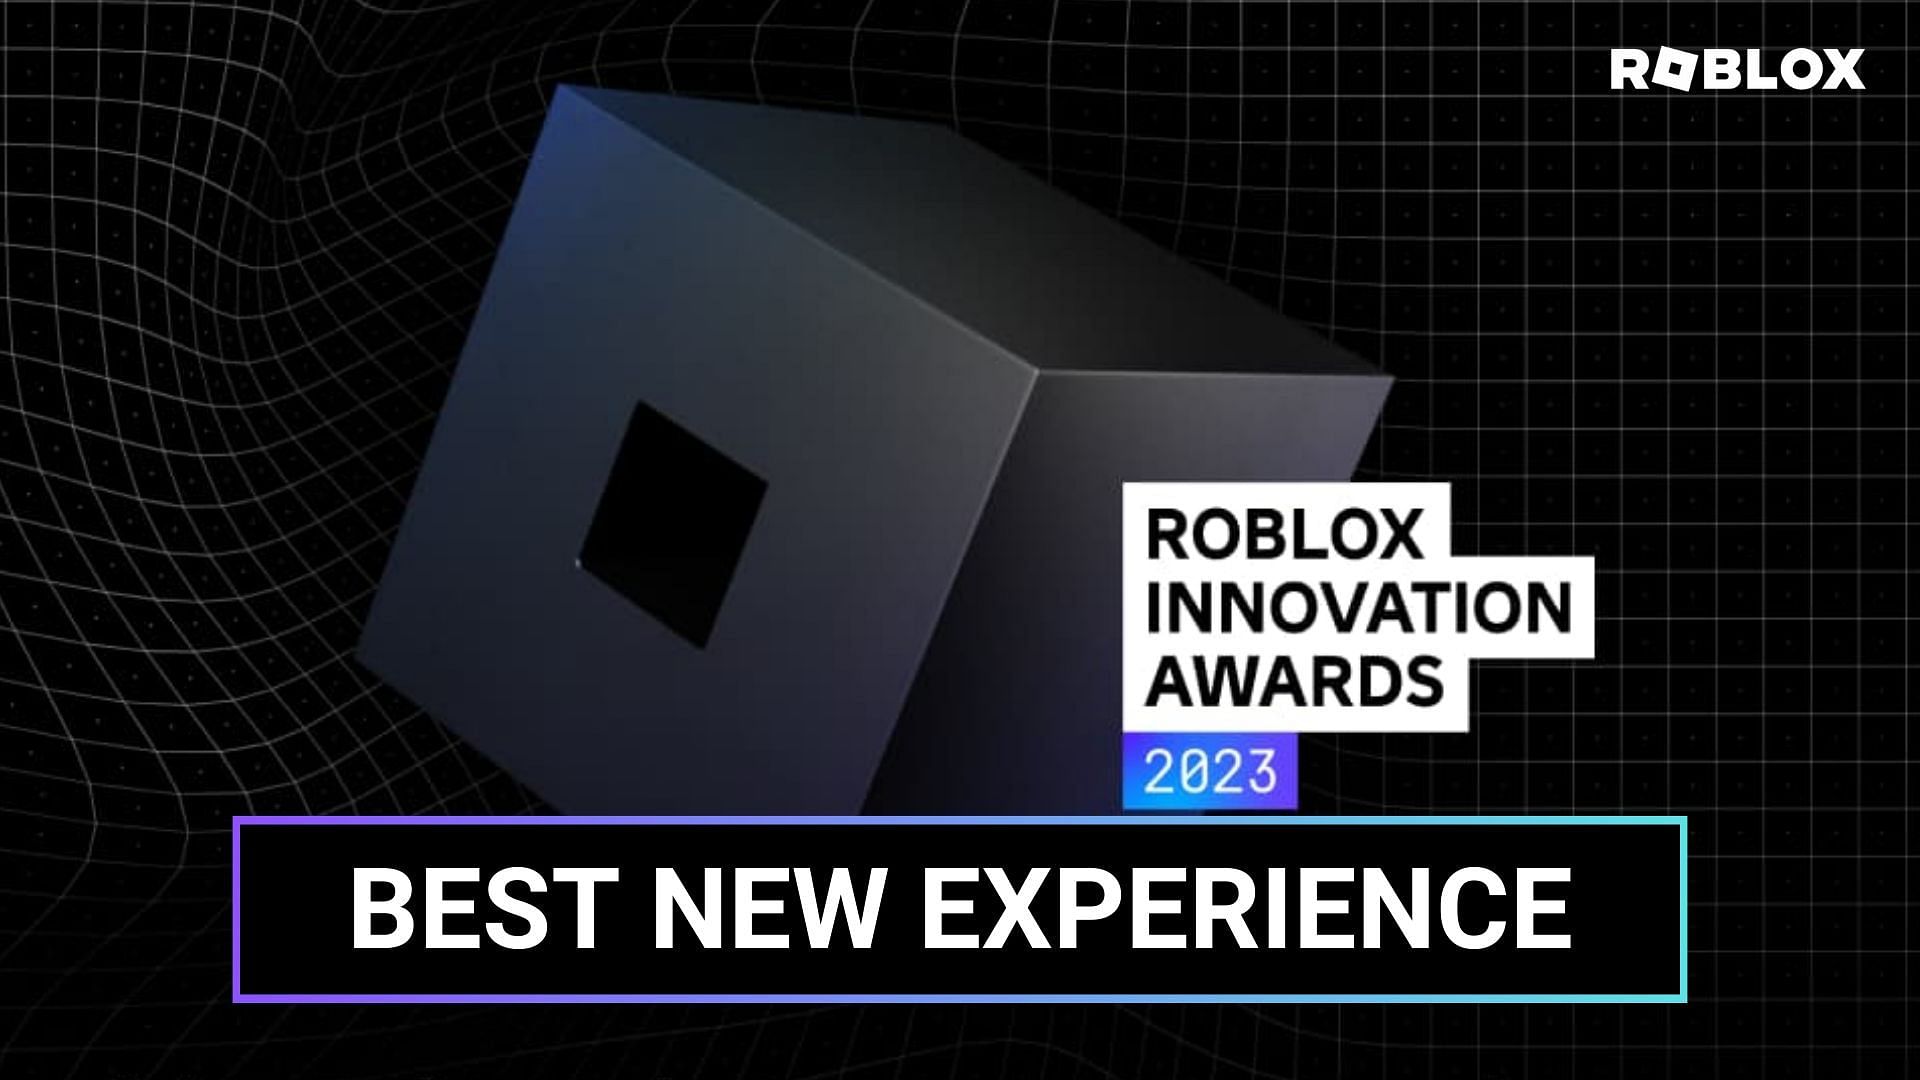 Roblox Innovation Awards 2023 Best New Experience